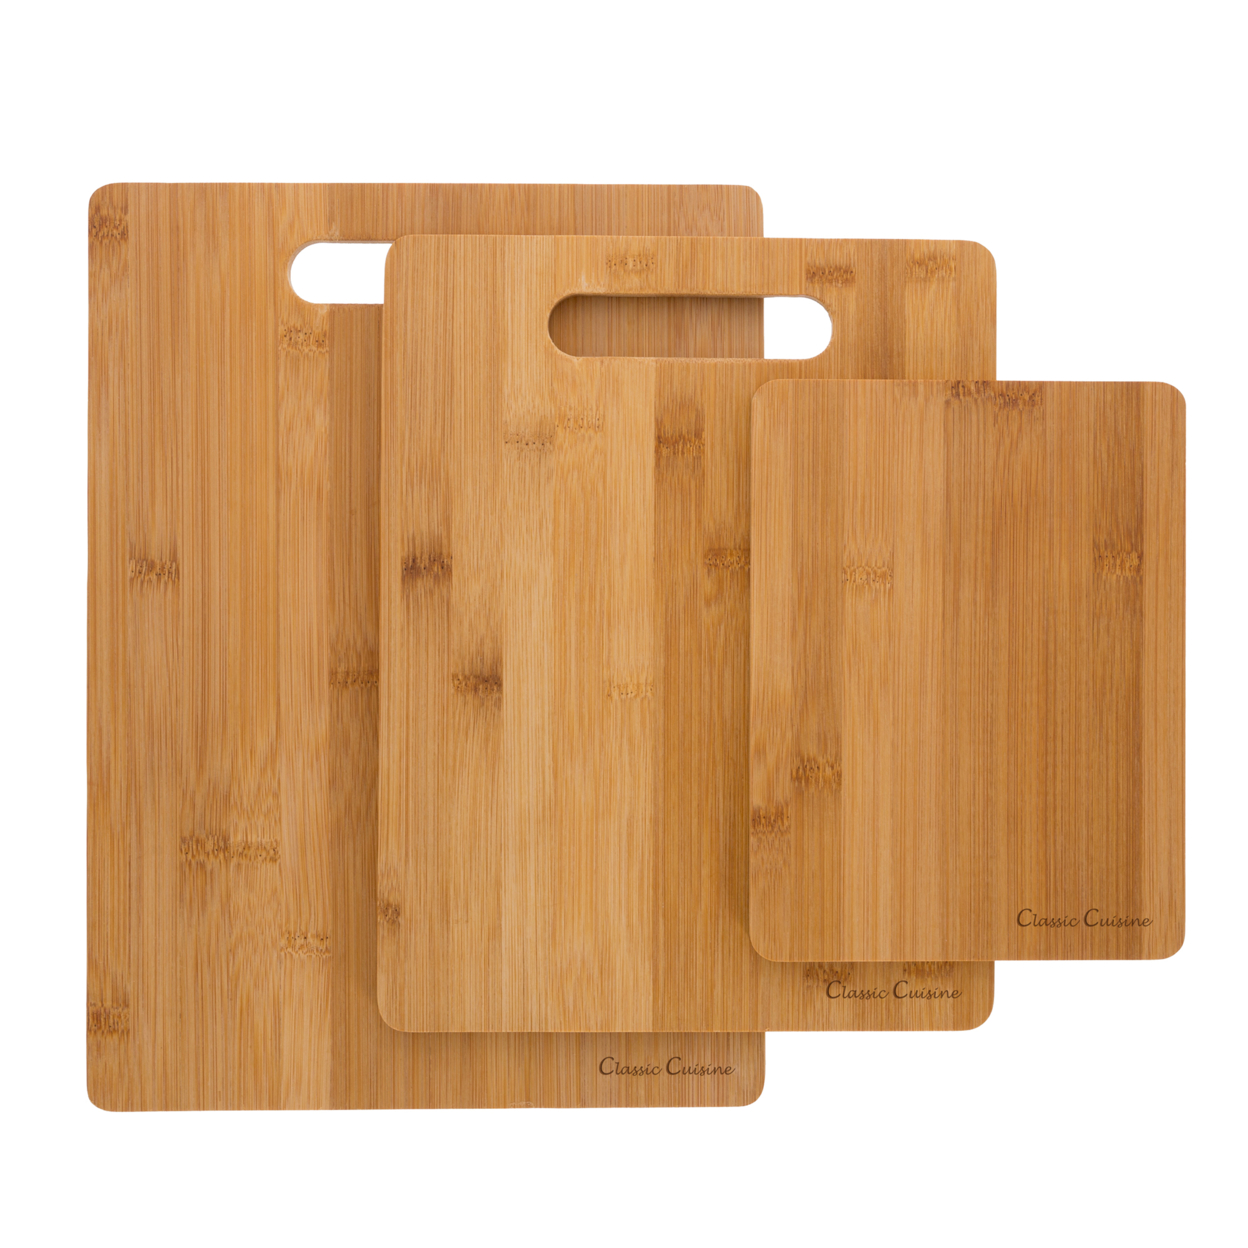 Set Of 3 Bamboo Cutting Boards By Classic Cuisine